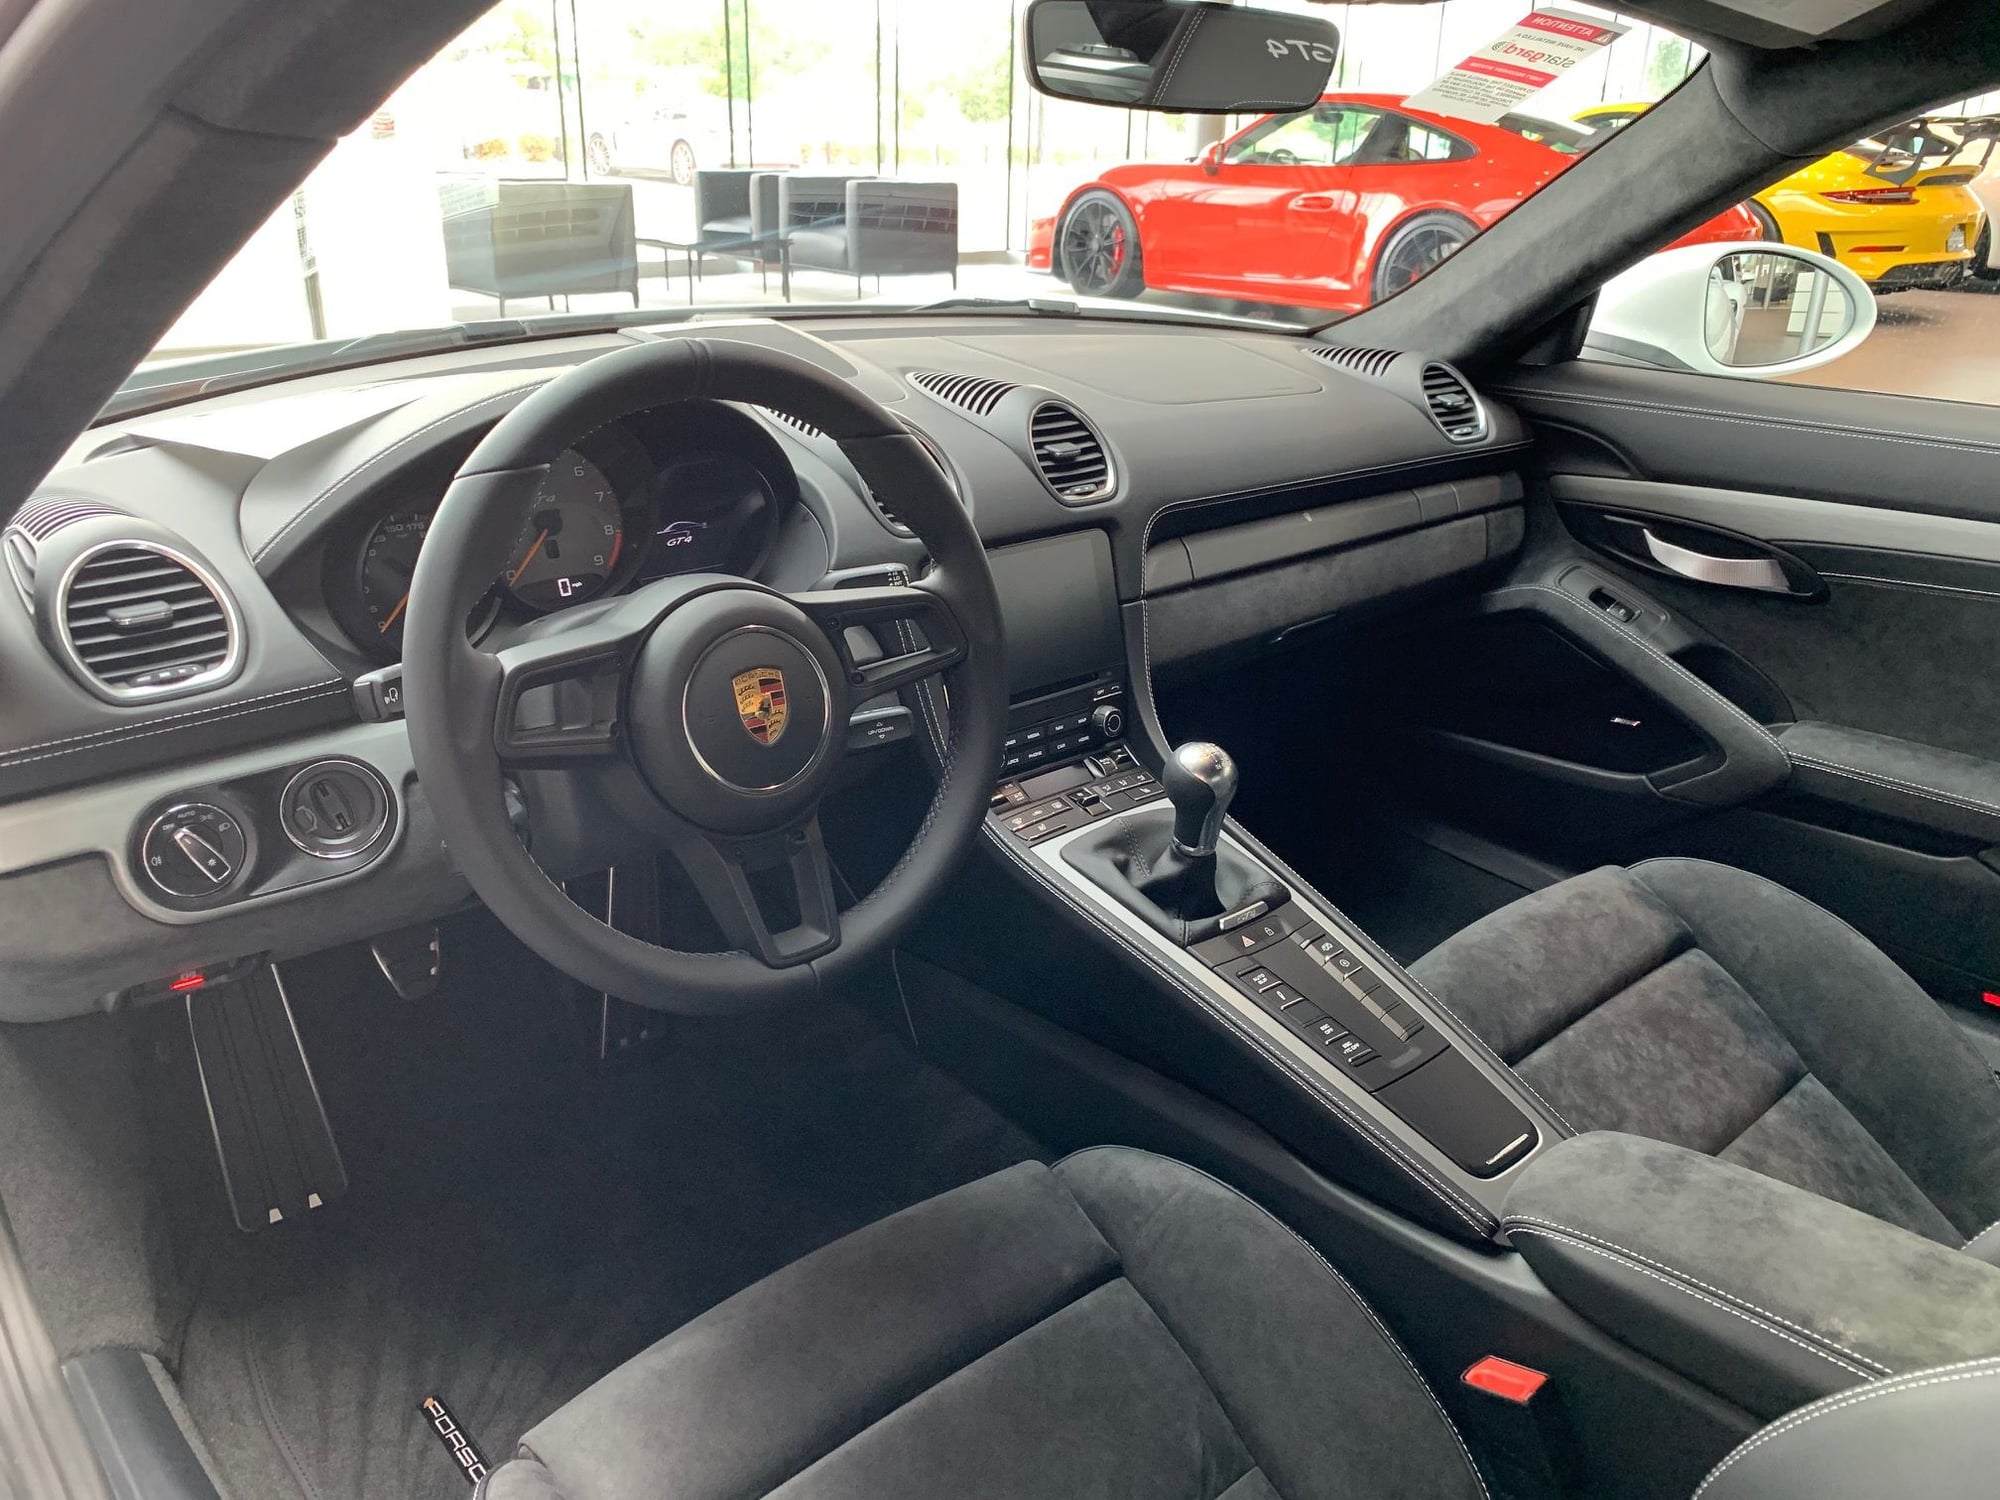 2020 Porsche 718 Cayman - Available Cayman GT4 at MSRP - New - VIN WP0AC2A87LK289270 - 20 Miles - 6 cyl - 2WD - Manual - Coupe - White - Houston, TX 77090, United States